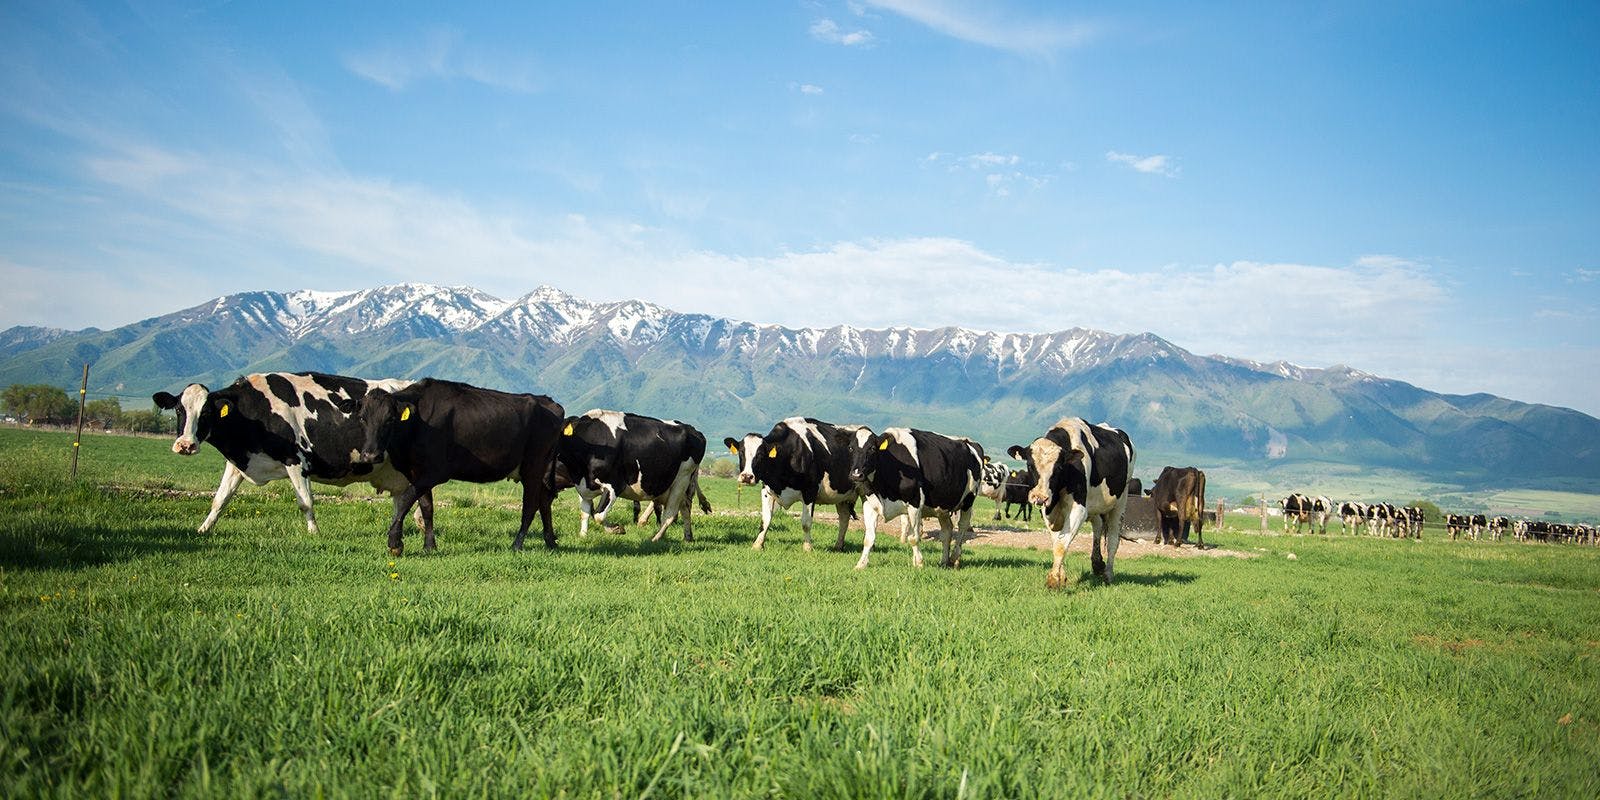 Organic dairy cows graze on a green pasture with mountains in the background on the Wangsgard farm in Utah.